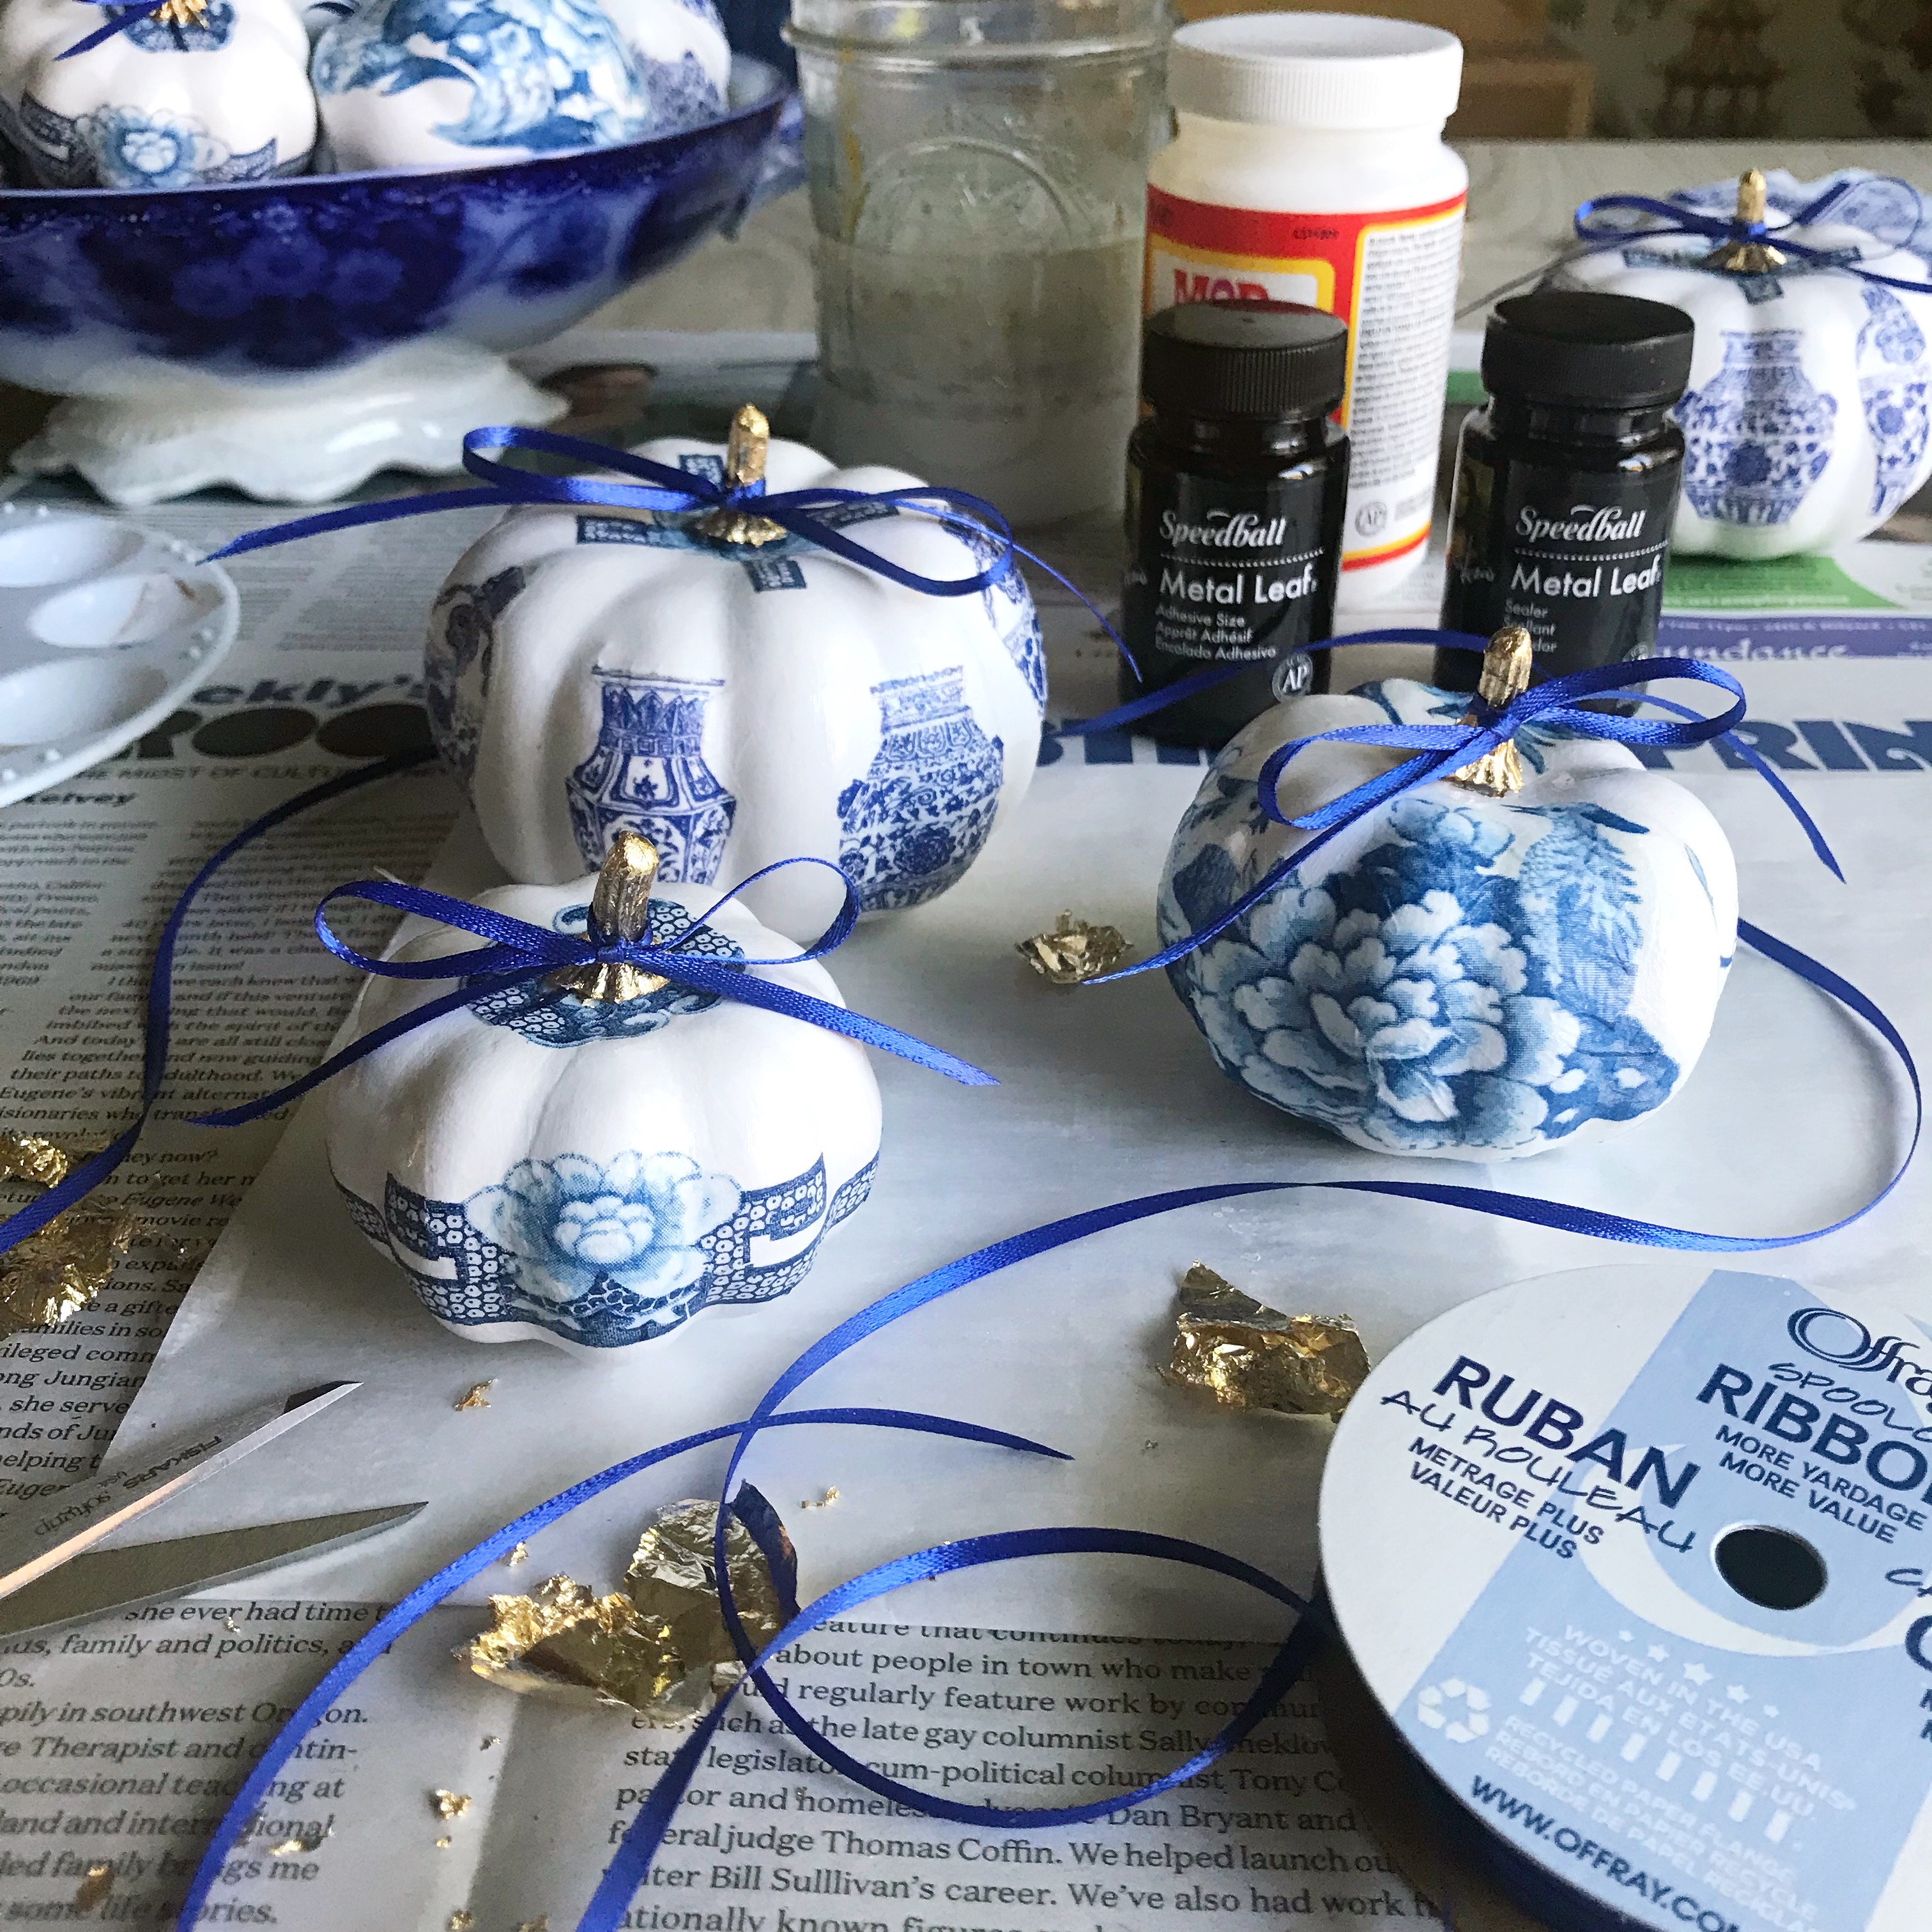 Under the Plum Blossom Tree, DIY: Decoupage Chinoiserie Mini Pumpkins, a blog post lesson in how to create autumn season faux decoupage pumpkins to use as holiday decorations.